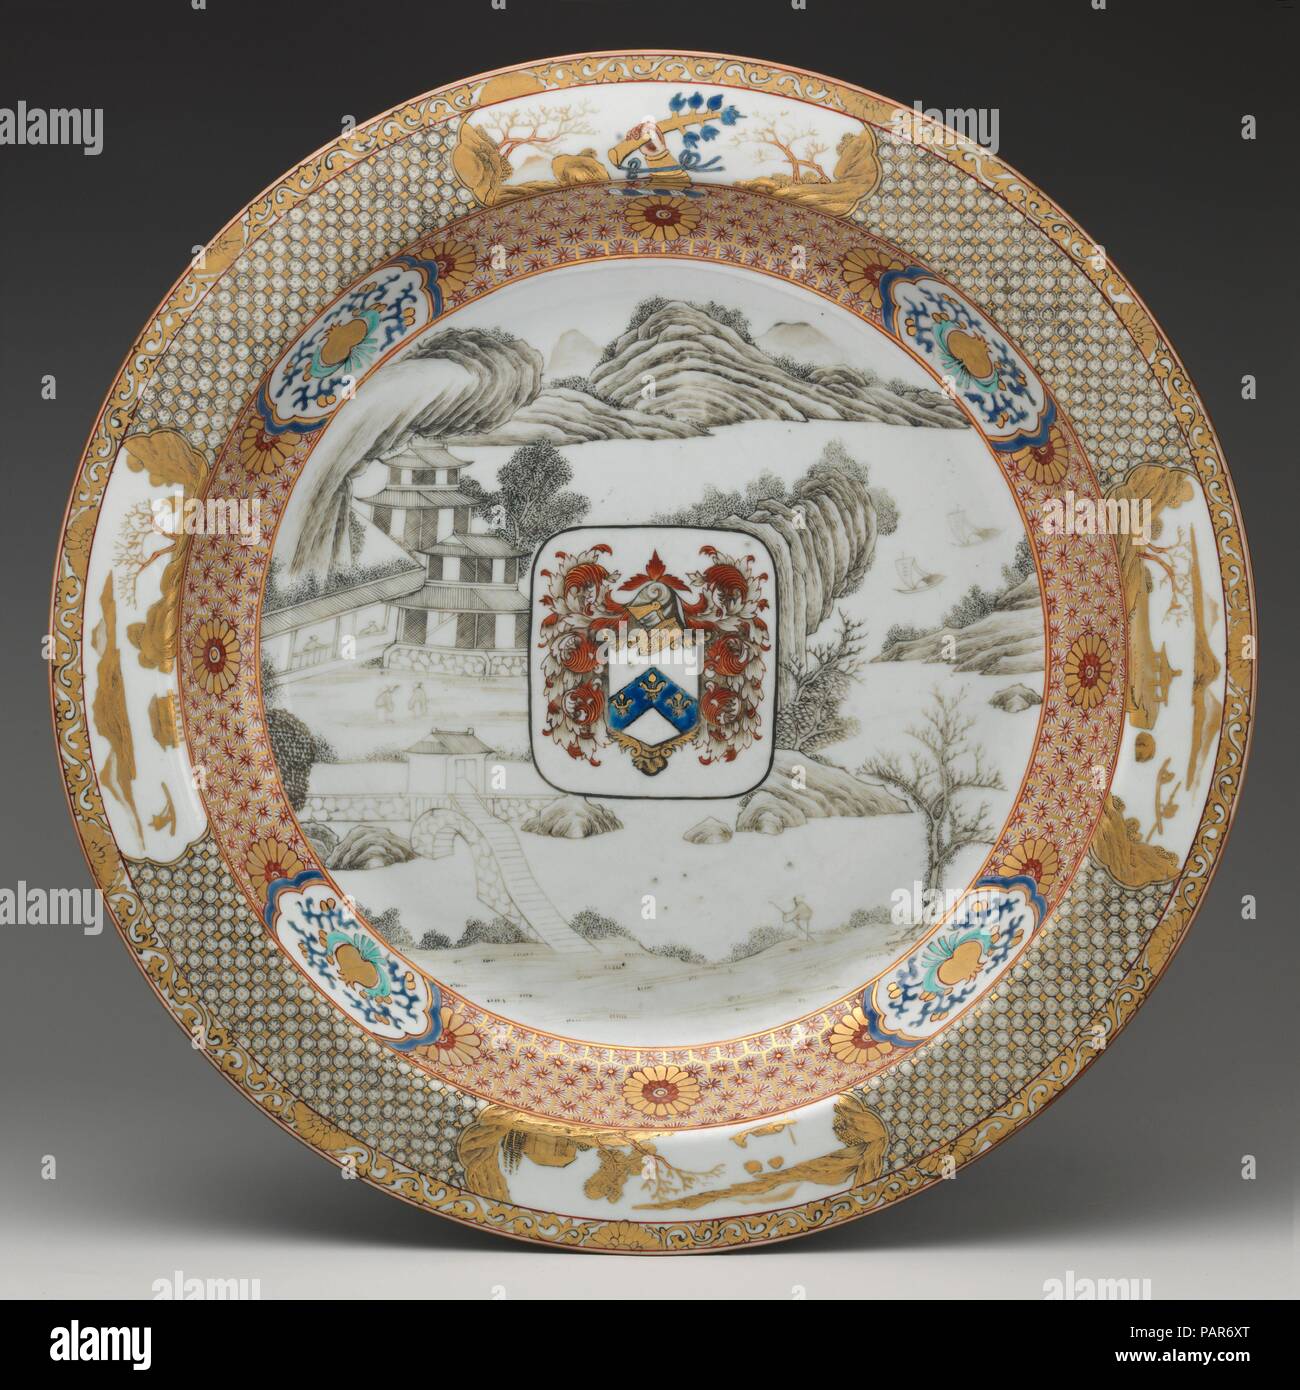 Plate. Culture: Chinese, for British market. Dimensions: Overall: 2 3/8 × 15 1/4 in. (6 × 38.7 cm). Date: 1725-30.  This dish is part of a service made for John Elwick of Cornhill, London (died 1730), who was a director of the English East India Company, the firm that dominated the British trade with India and China. Museum: Metropolitan Museum of Art, New York, USA. Stock Photo